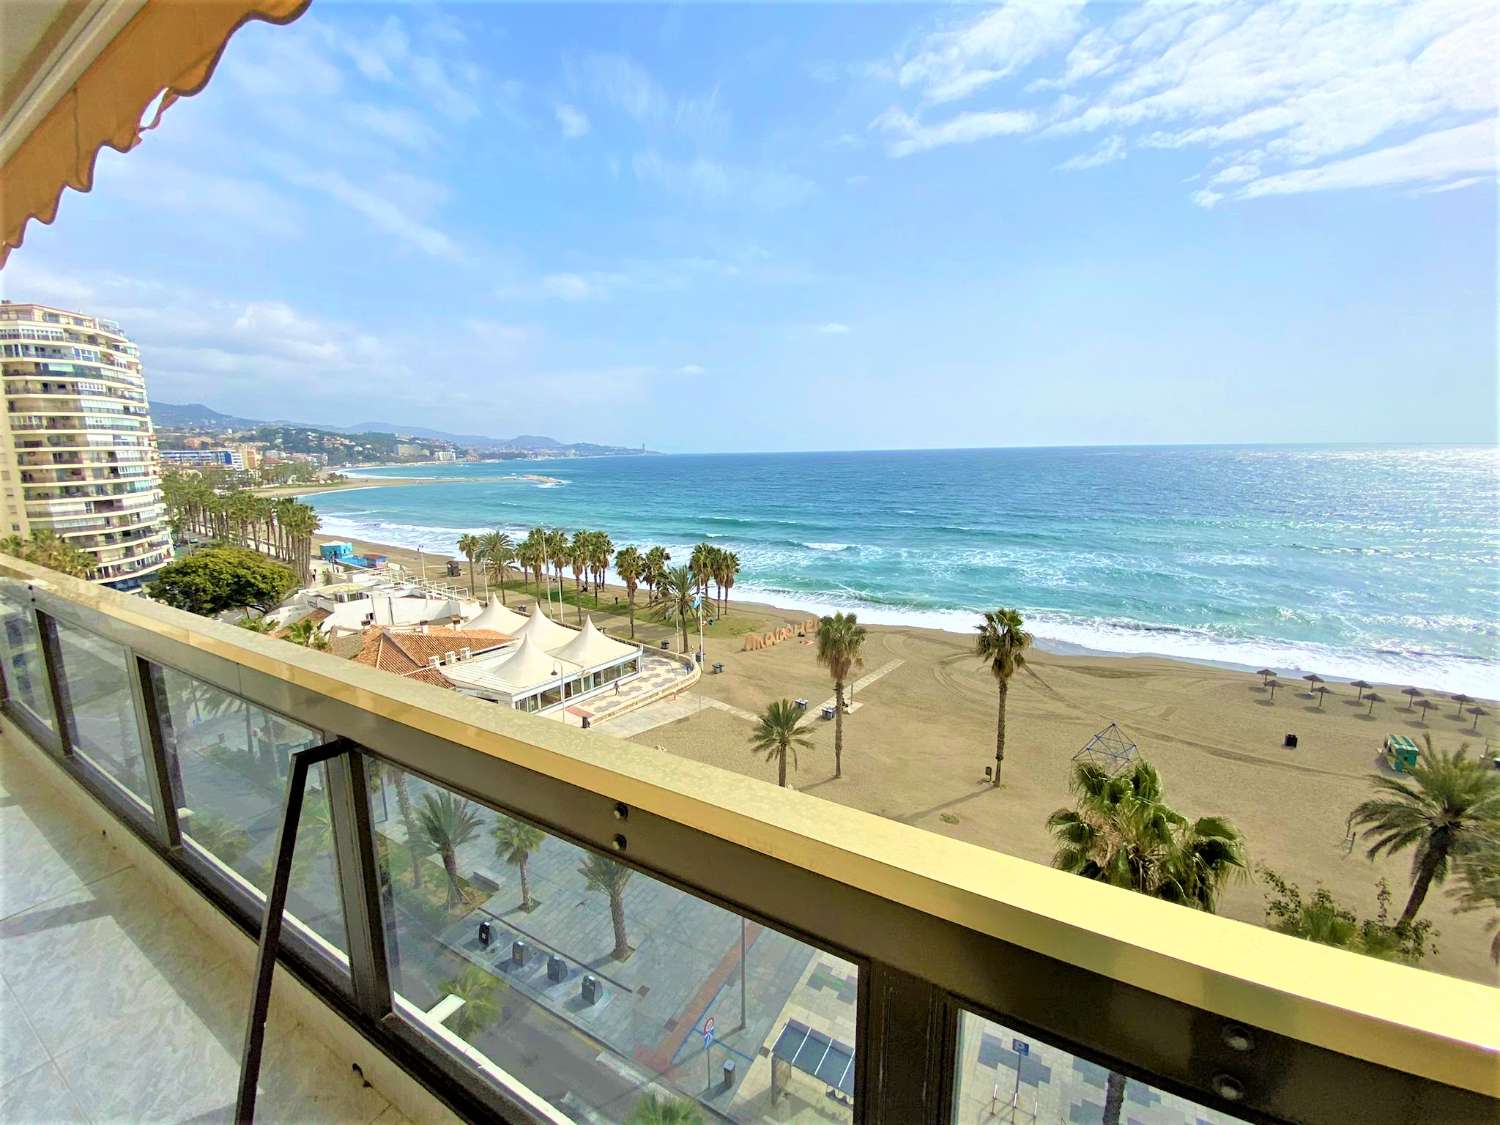 SOLD! SPECTACULAR APARTMENT WITH FRONT VIEWS TO THE SEA GARAGE AND STORAGE ROOM INCLUDED IN PRICE